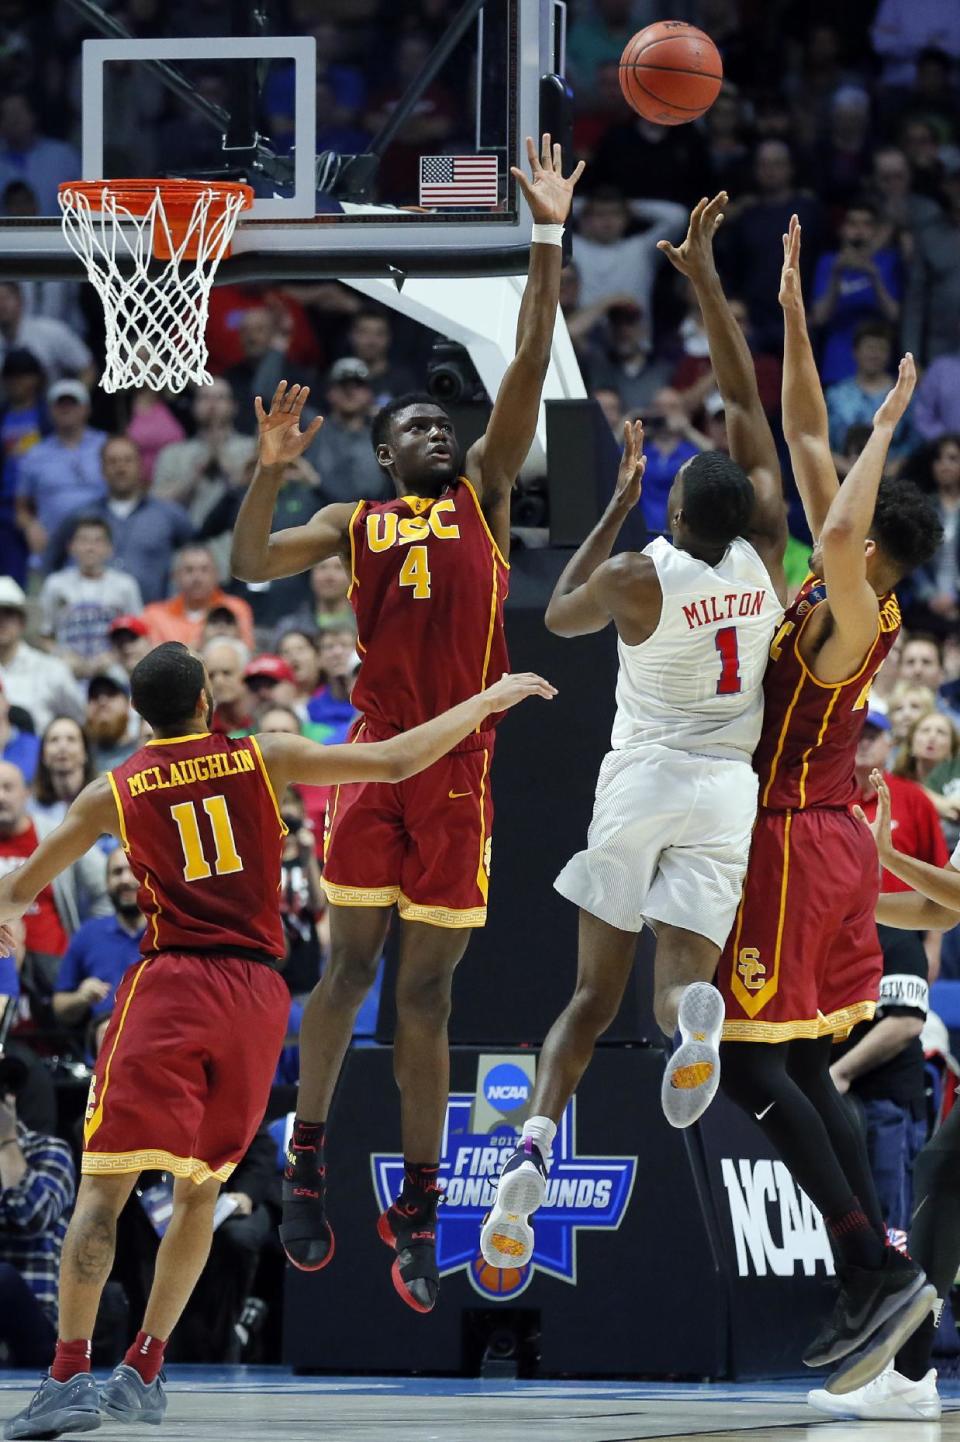 SMU guard Shake Milton (1) throws up an unsuccessful last second shot as Southern California's Jordan McLaughlin (11), Chimezie Metu (4) and Bennie Boatwright, right, defend in the second half of a first-round game in the men's NCAA college basketball tournament in Tulsa, Okla., Friday March 17, 2017. Southern California won 66-65. (AP Photo/Tony Gutierrez)